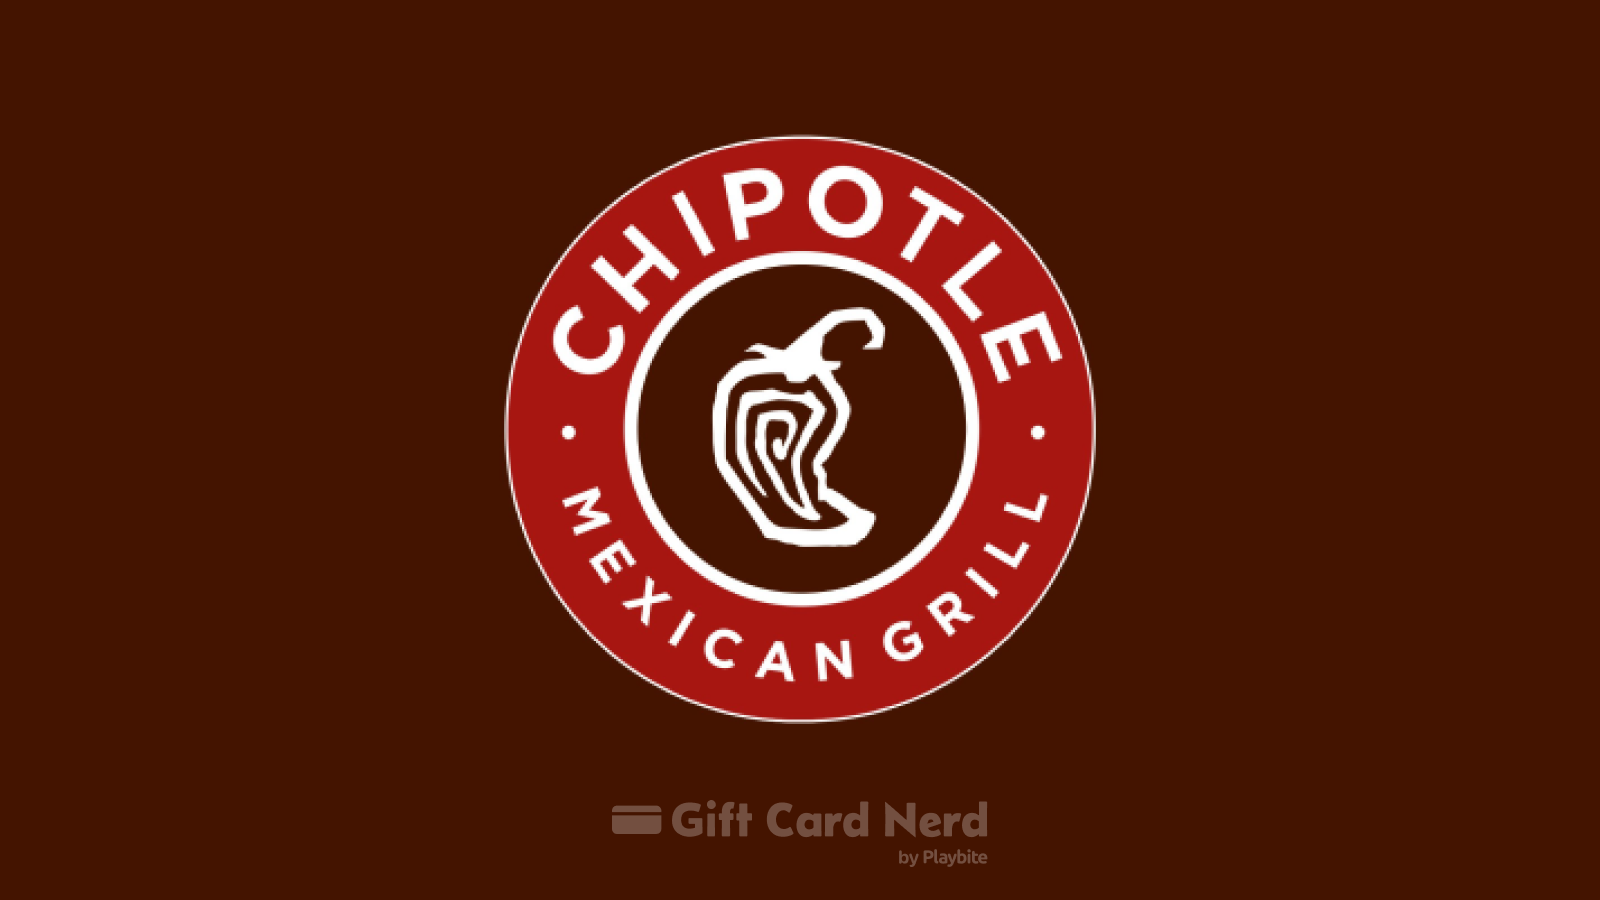 Can I Use a Chipotle Gift Card on Grubhub?